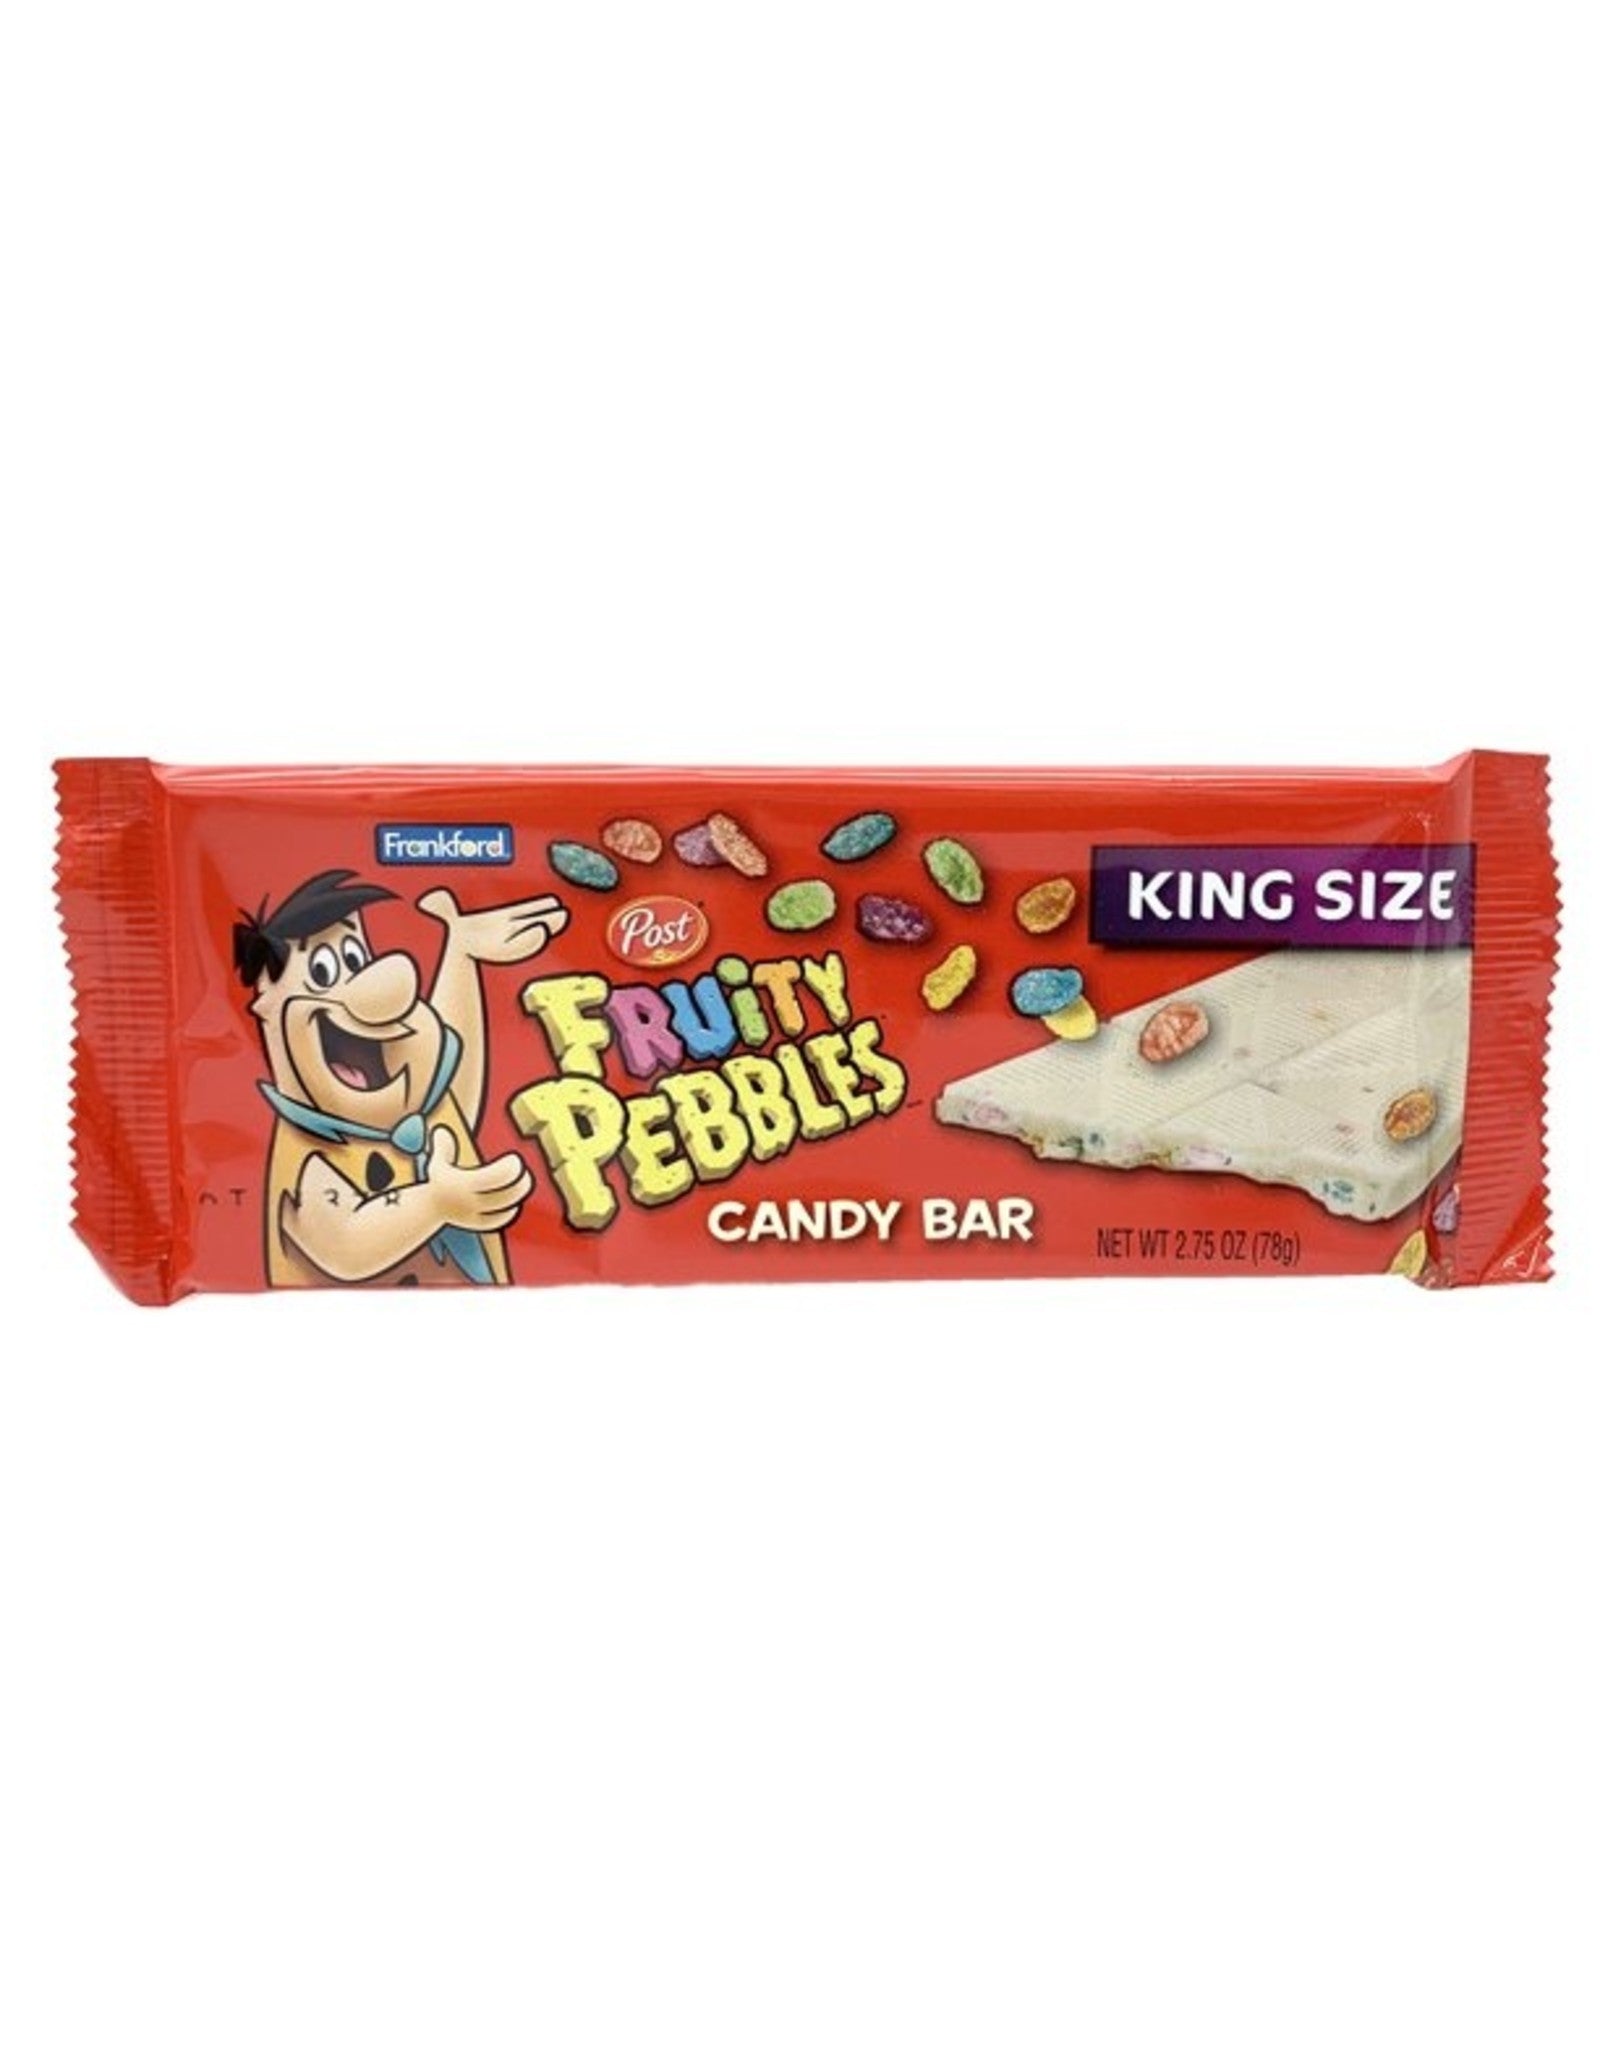 Frankford Fruity Pebbles White Chocolate Bar